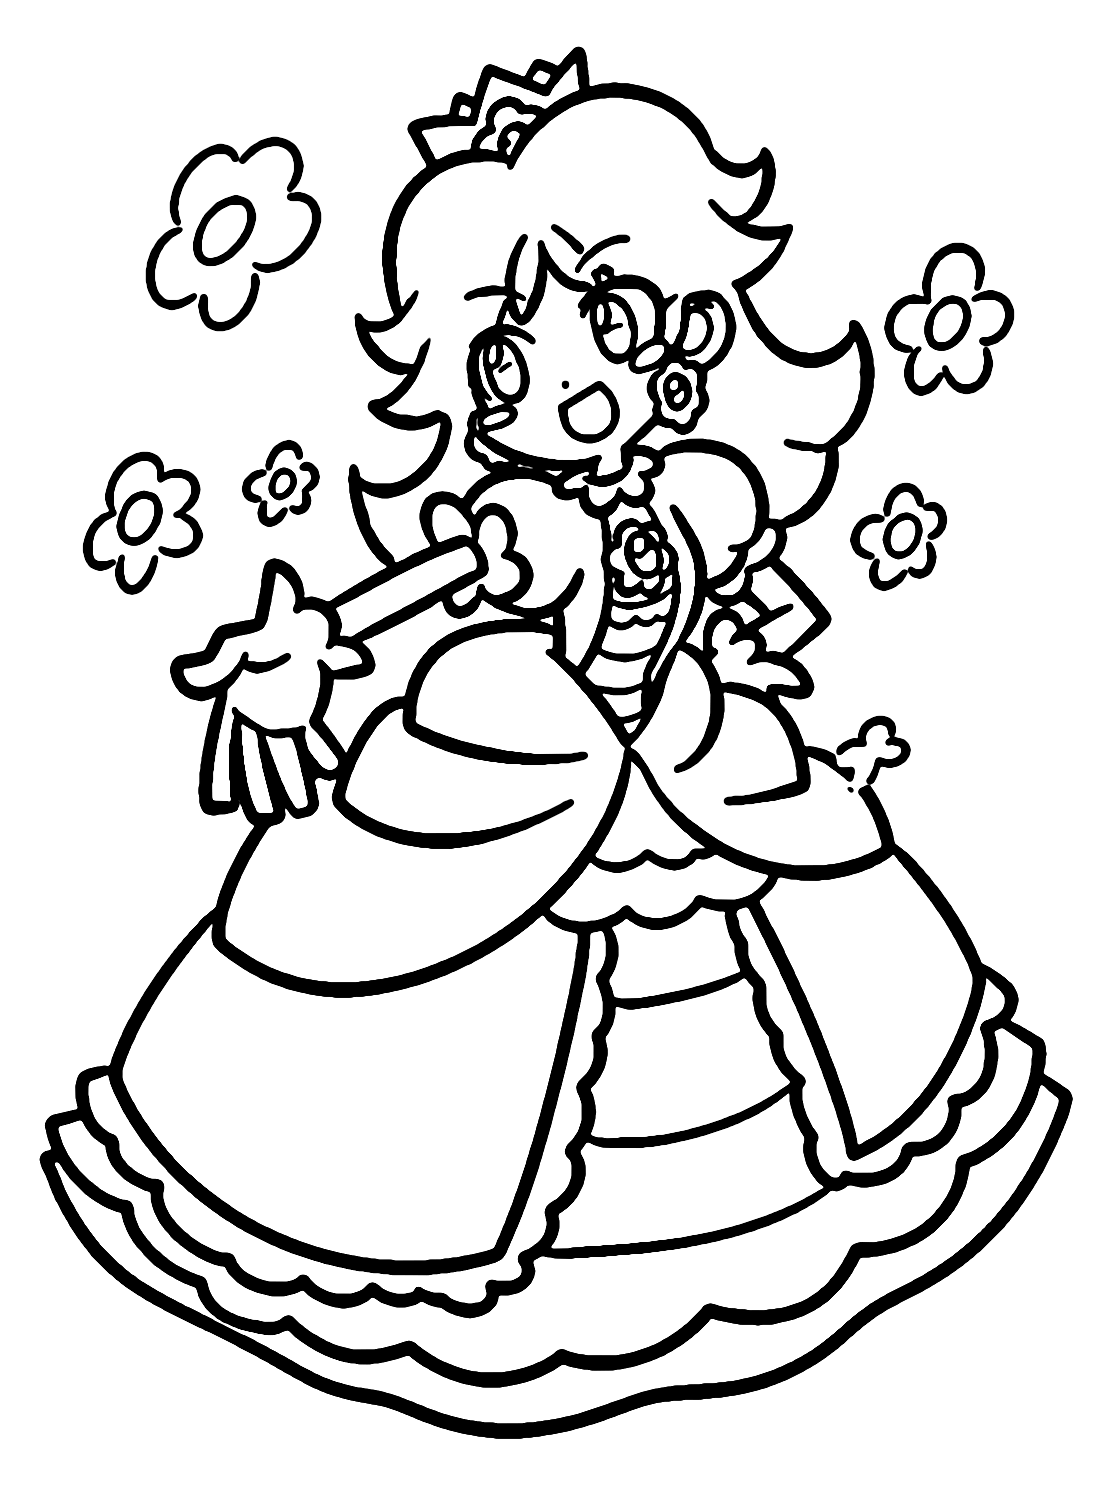 Lovely Daisy from Super Mario Coloring Page